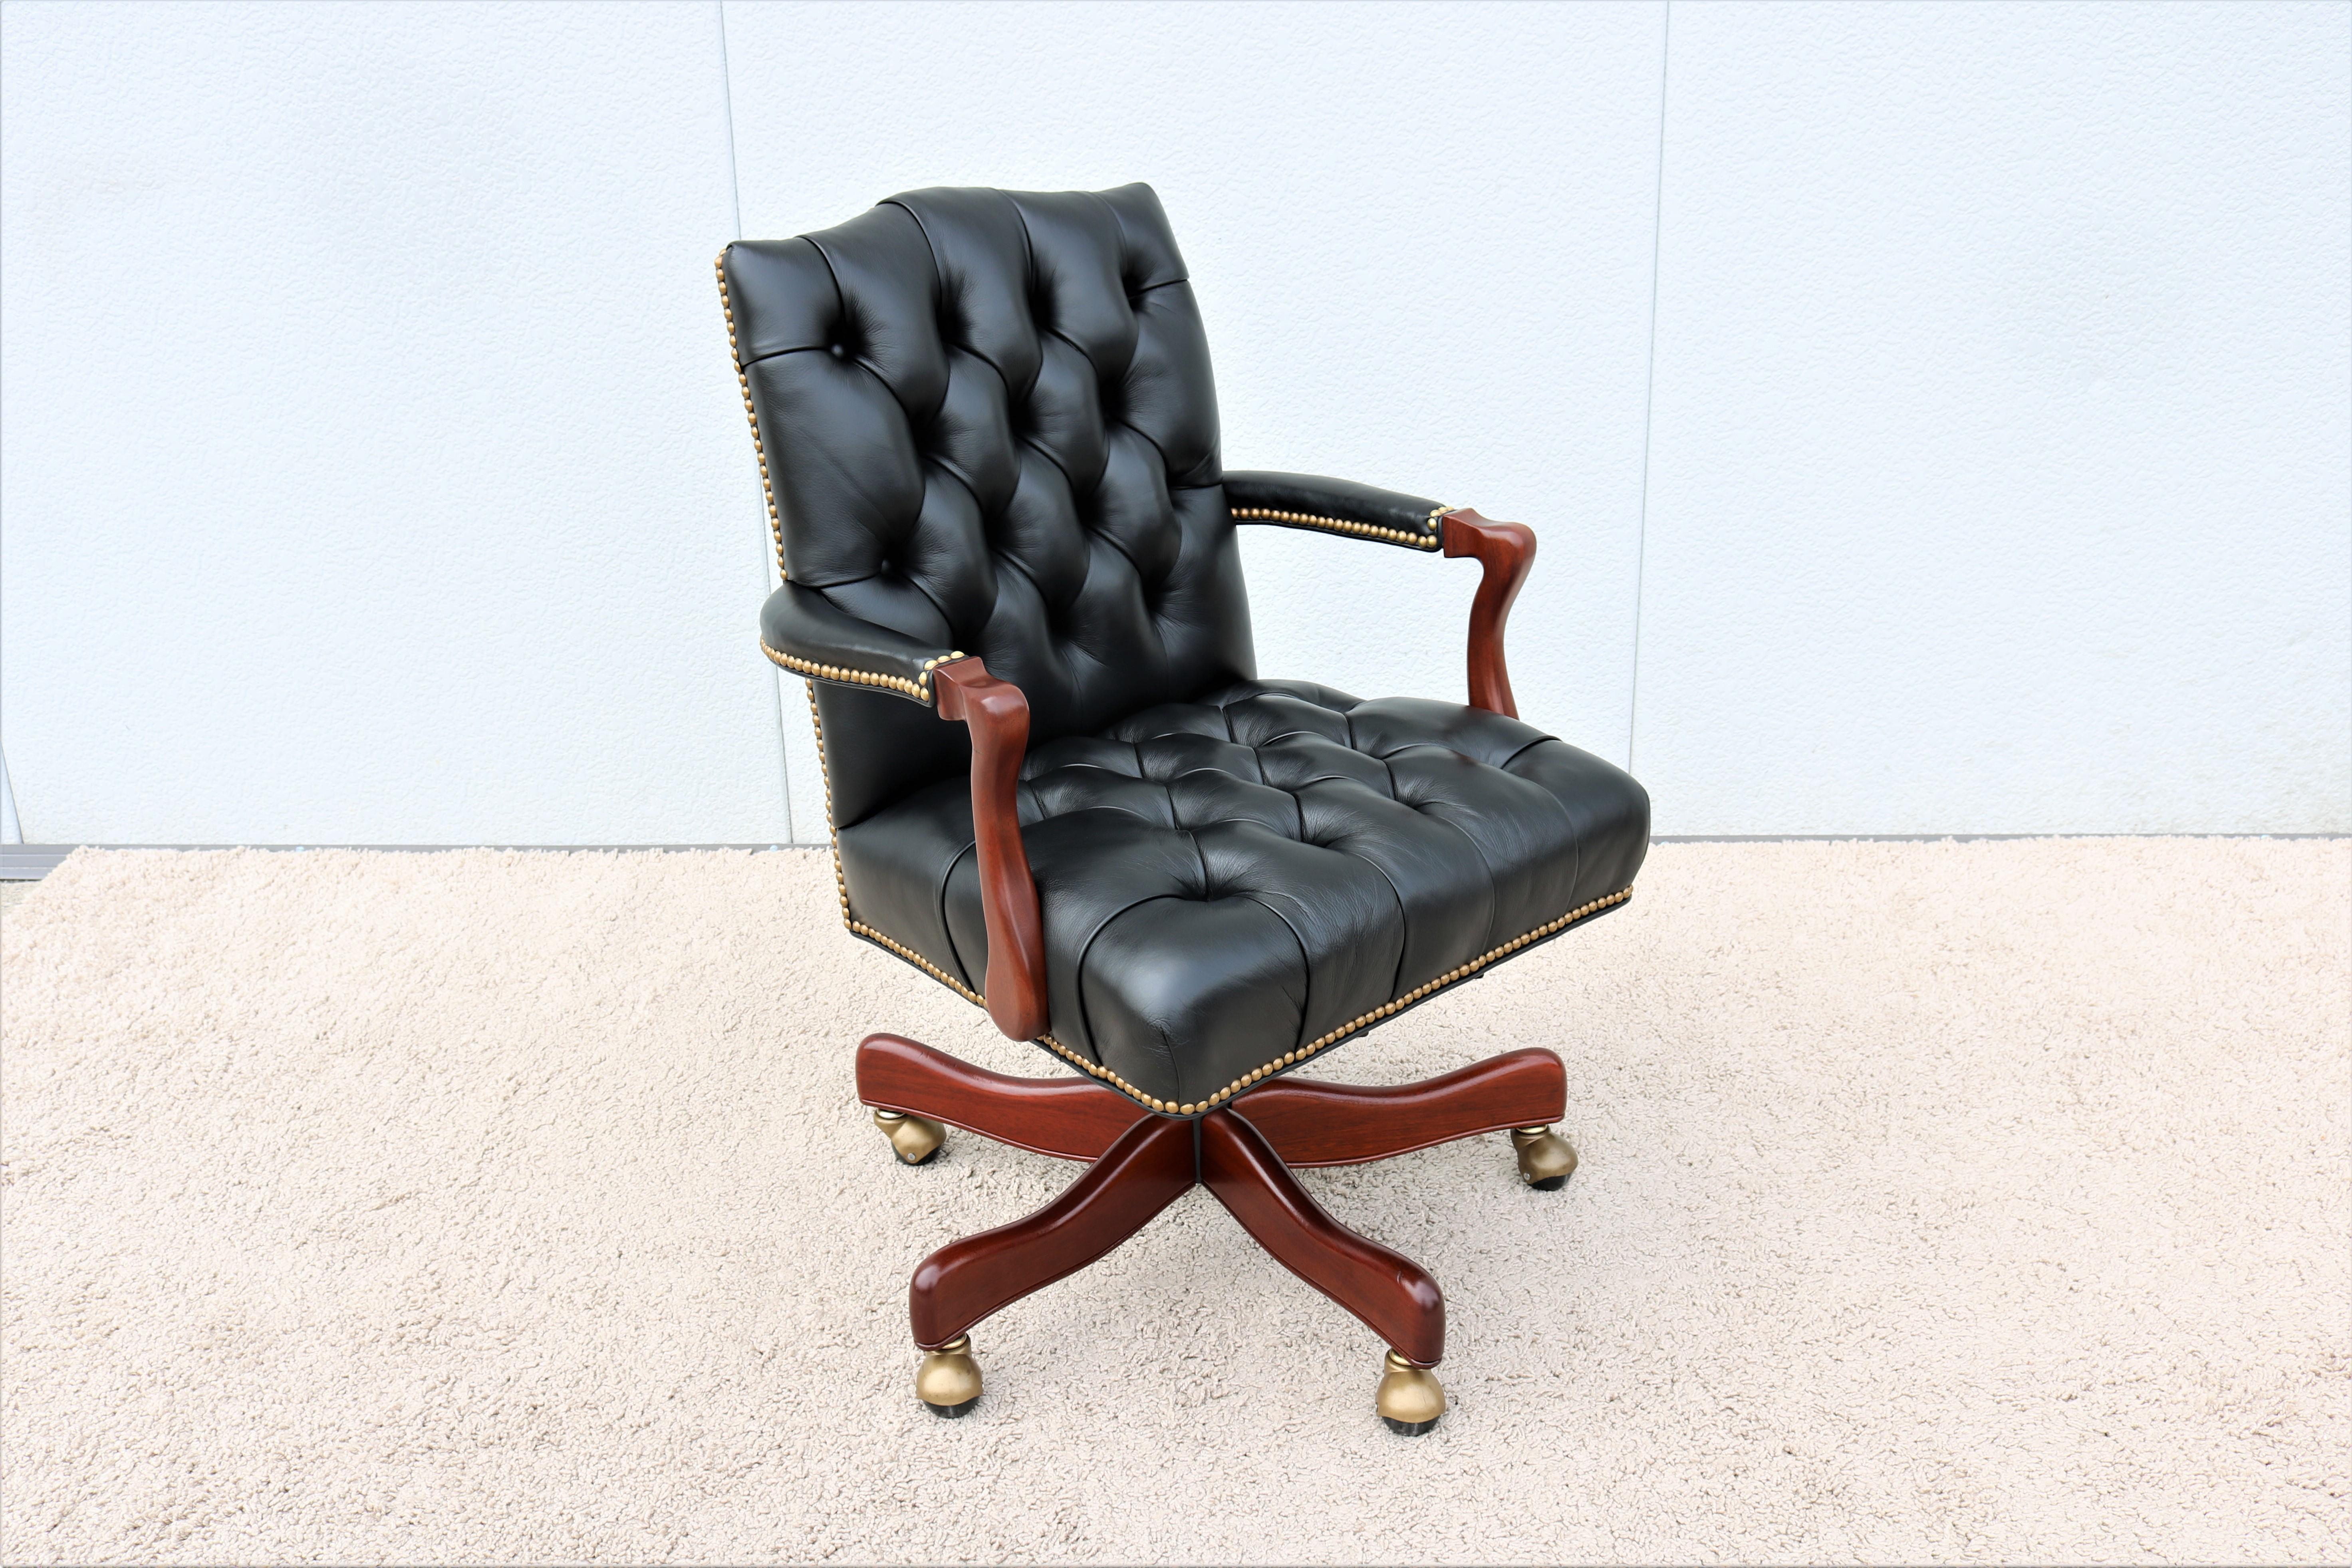 Fabulous traditional Graham deep button tufted leather swivel and tilt executive desk chair by Cabot Wrenn. 
A classic timeless and luxurious style inspired by the 18th and 19th-century design.
Beautifully handcrafted by skilled artisans using